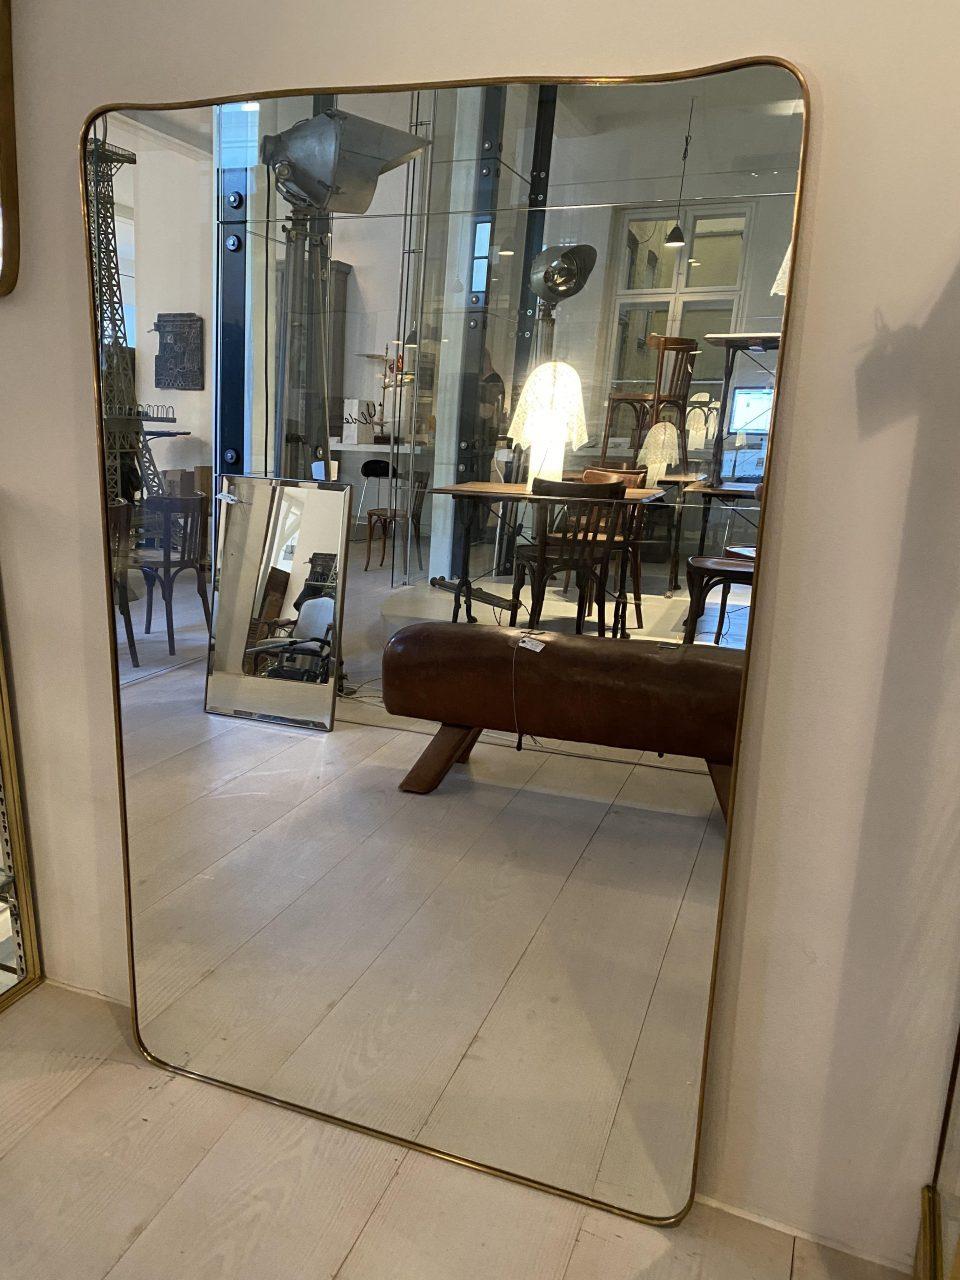 Magnificent Italian figure mirror from circa 1950s, in a beautiful organic curved yet angular design. Original mirrored glass, and stylistically related to creations by the well-known designer Gio Ponti’s. The mirror has suspension brackets mounted